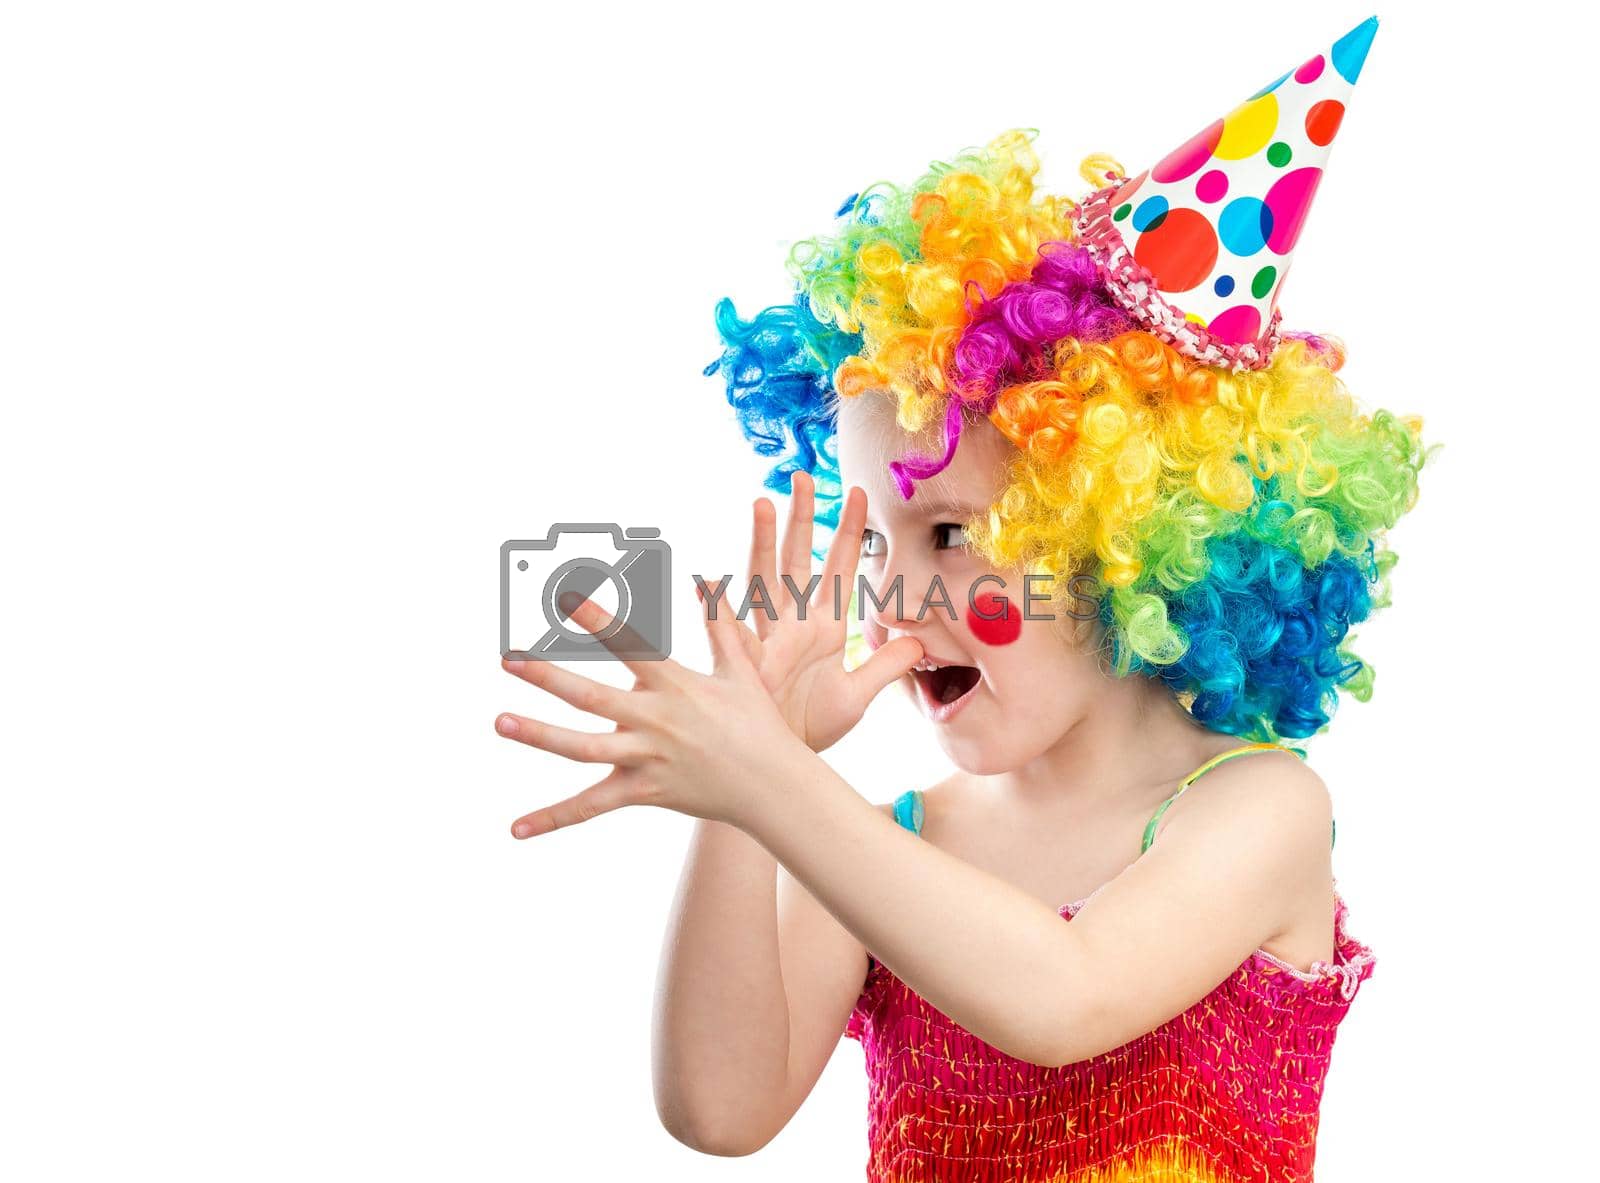 Royalty free image of Little kid clown shows something funny by tan4ikk1